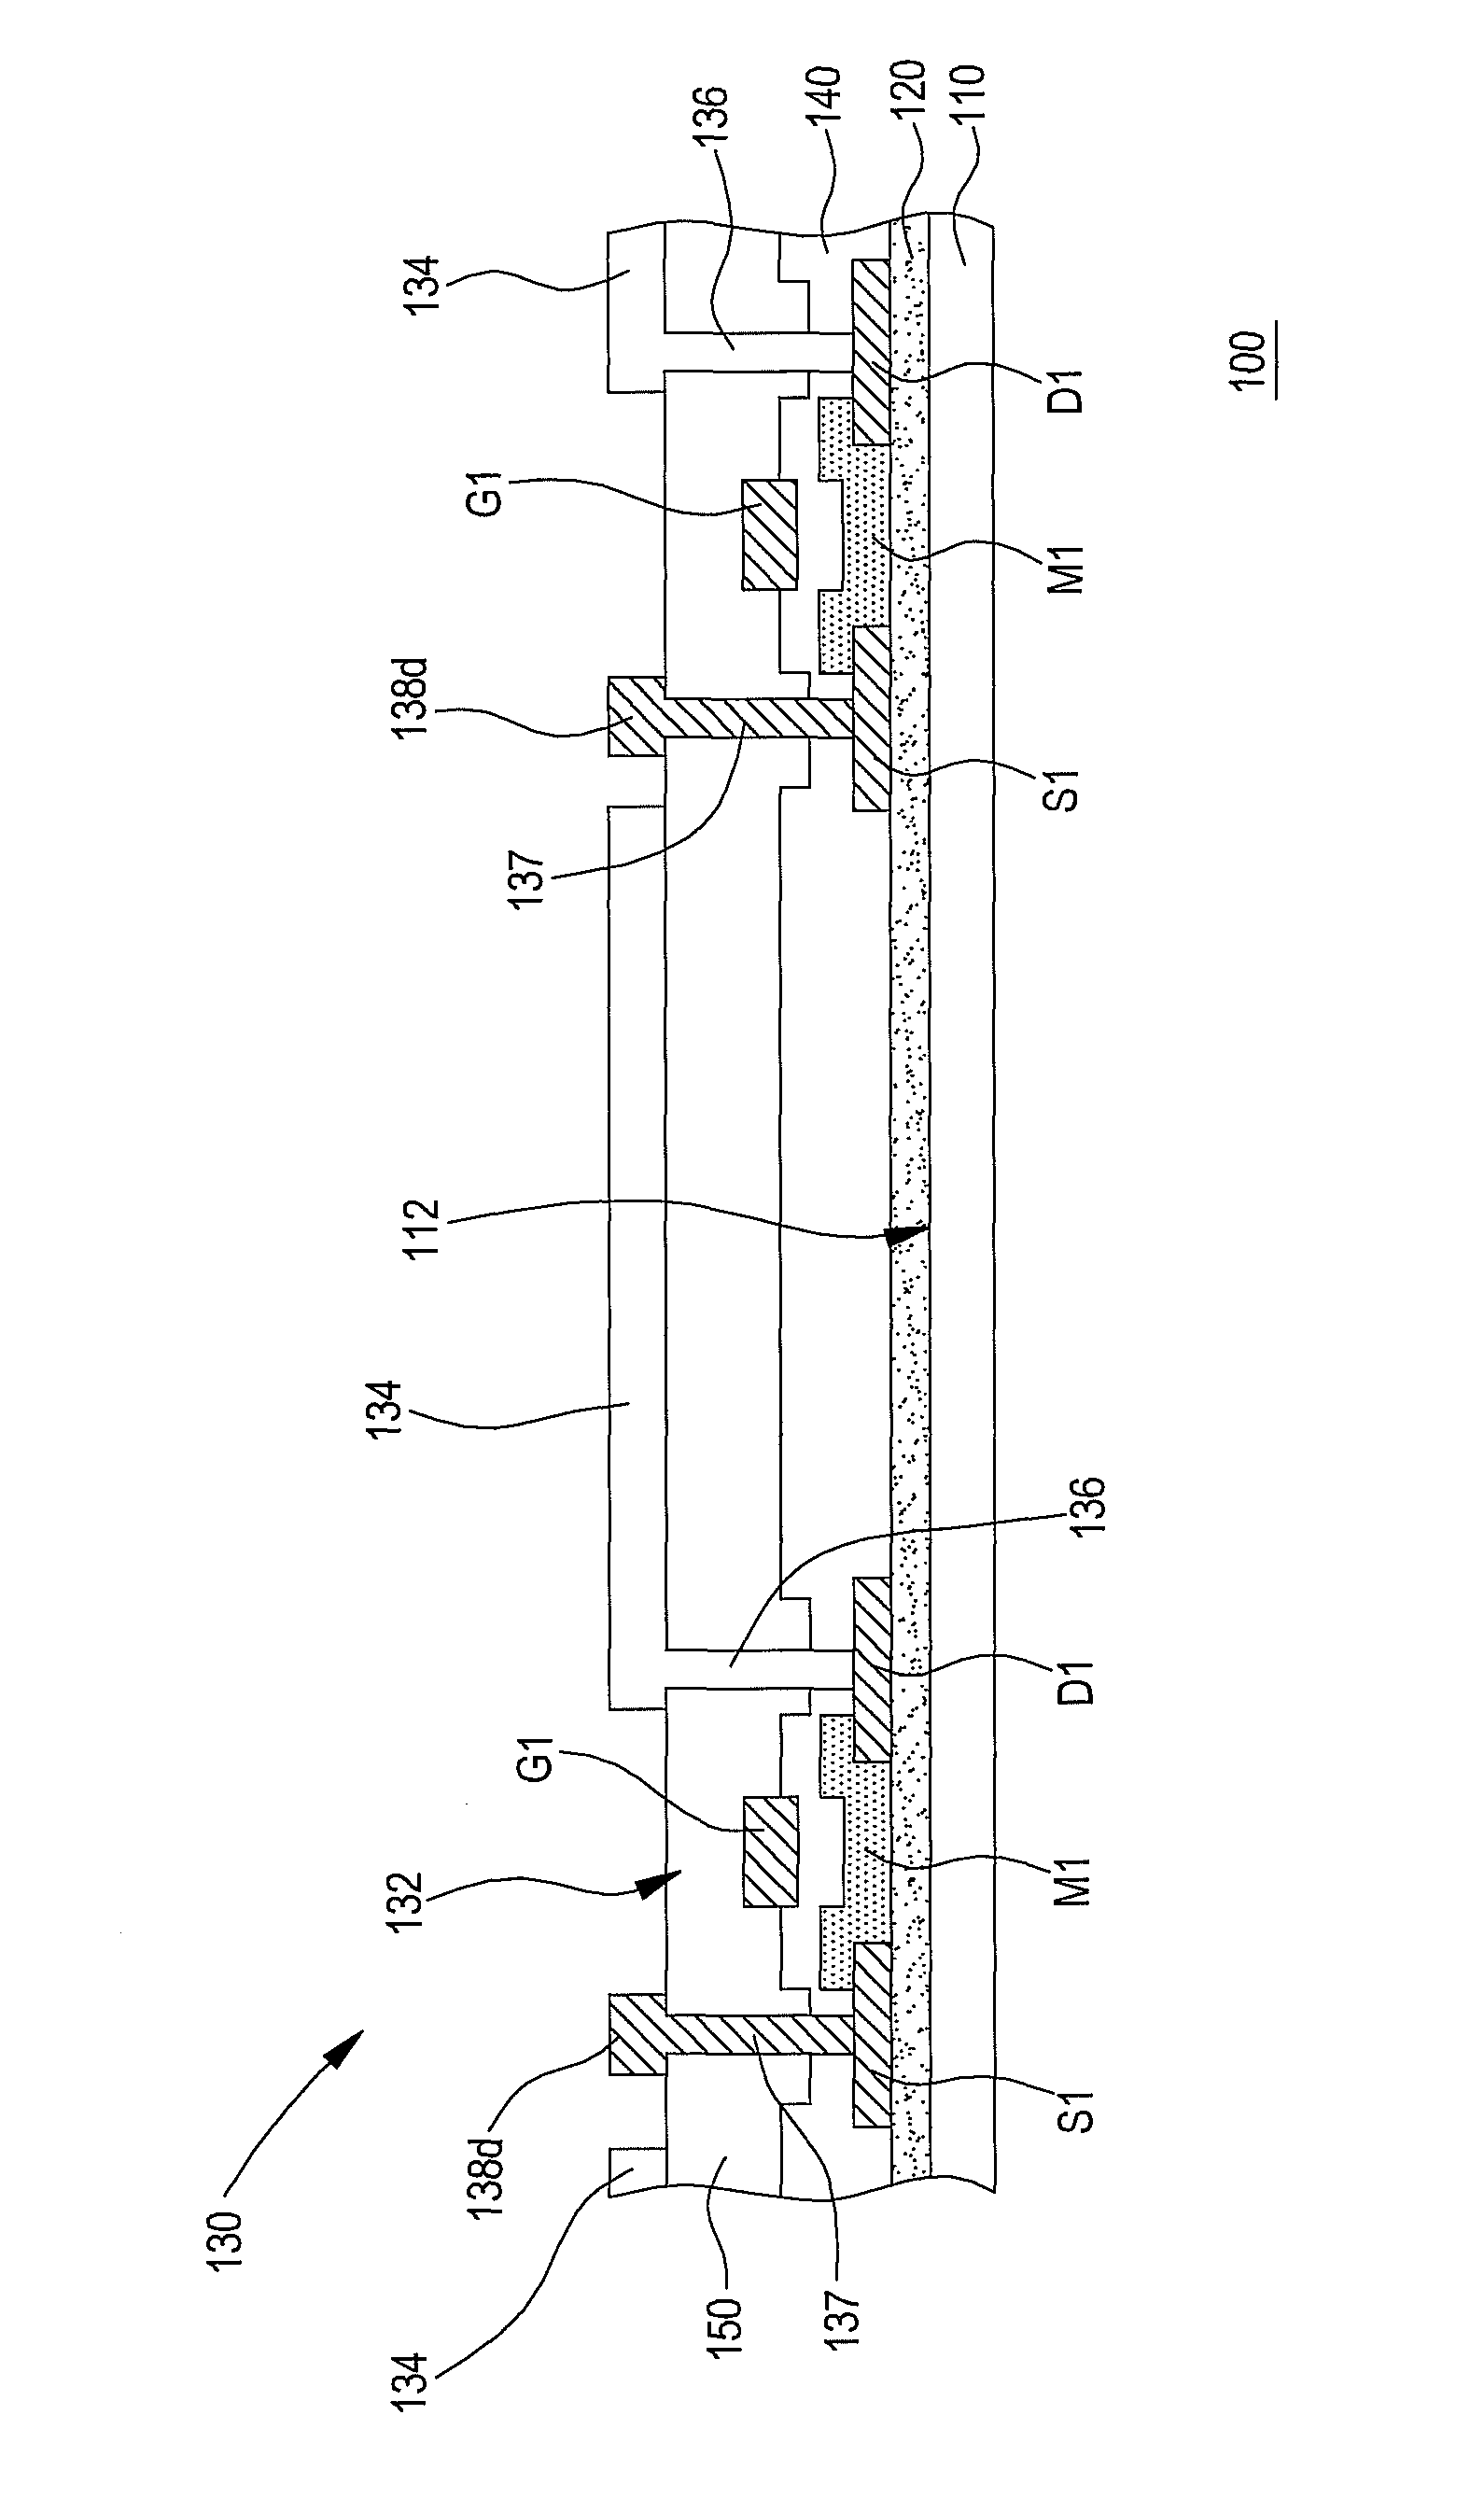 Top-gate transistor array substrate